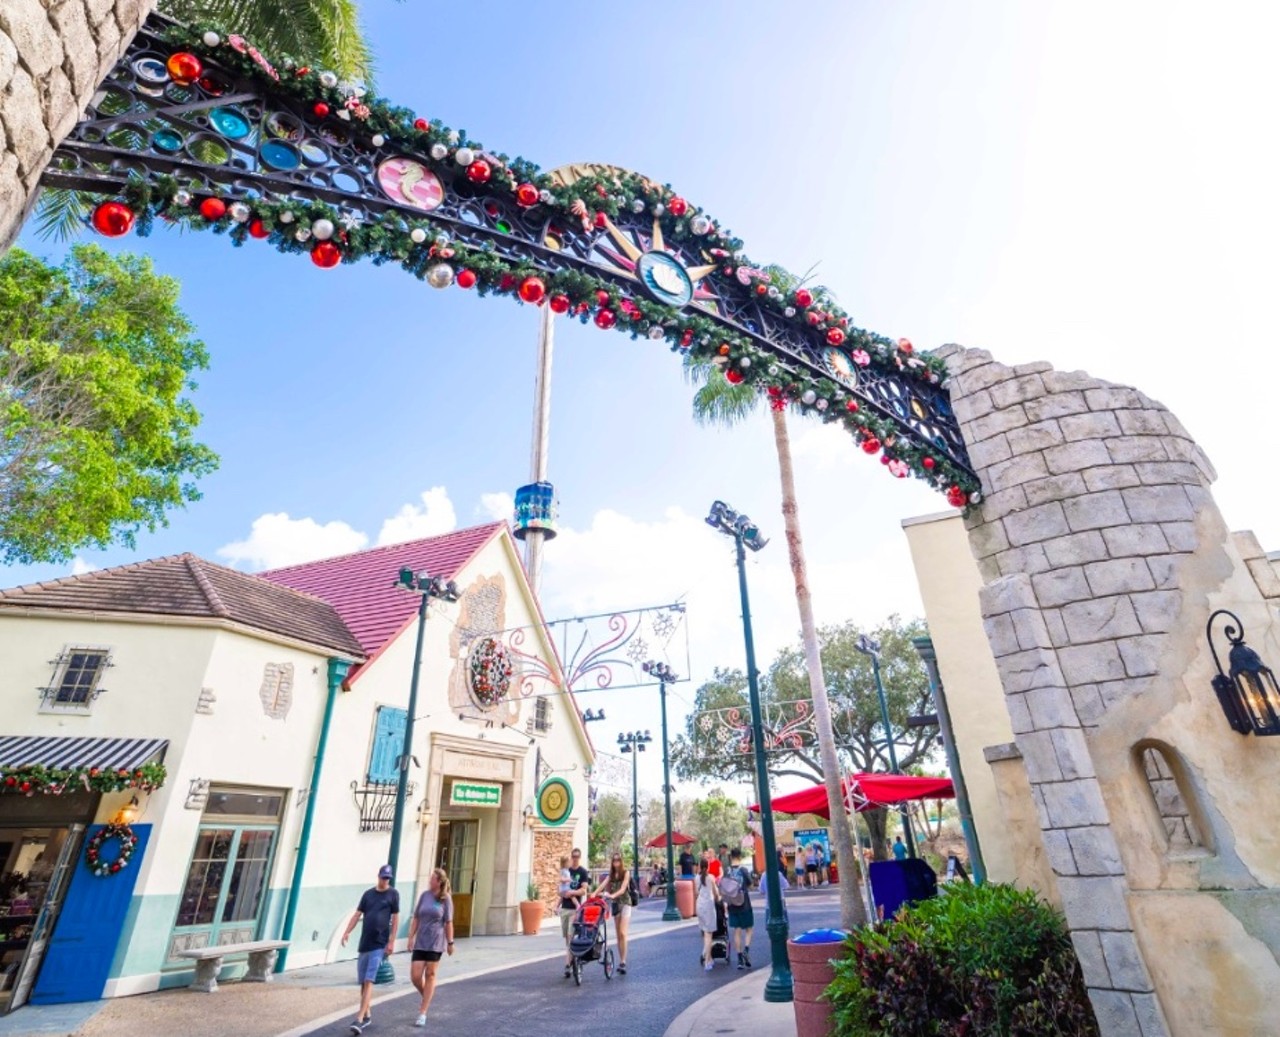 23 Christmas bucket list activities to do in Orlando this holiday